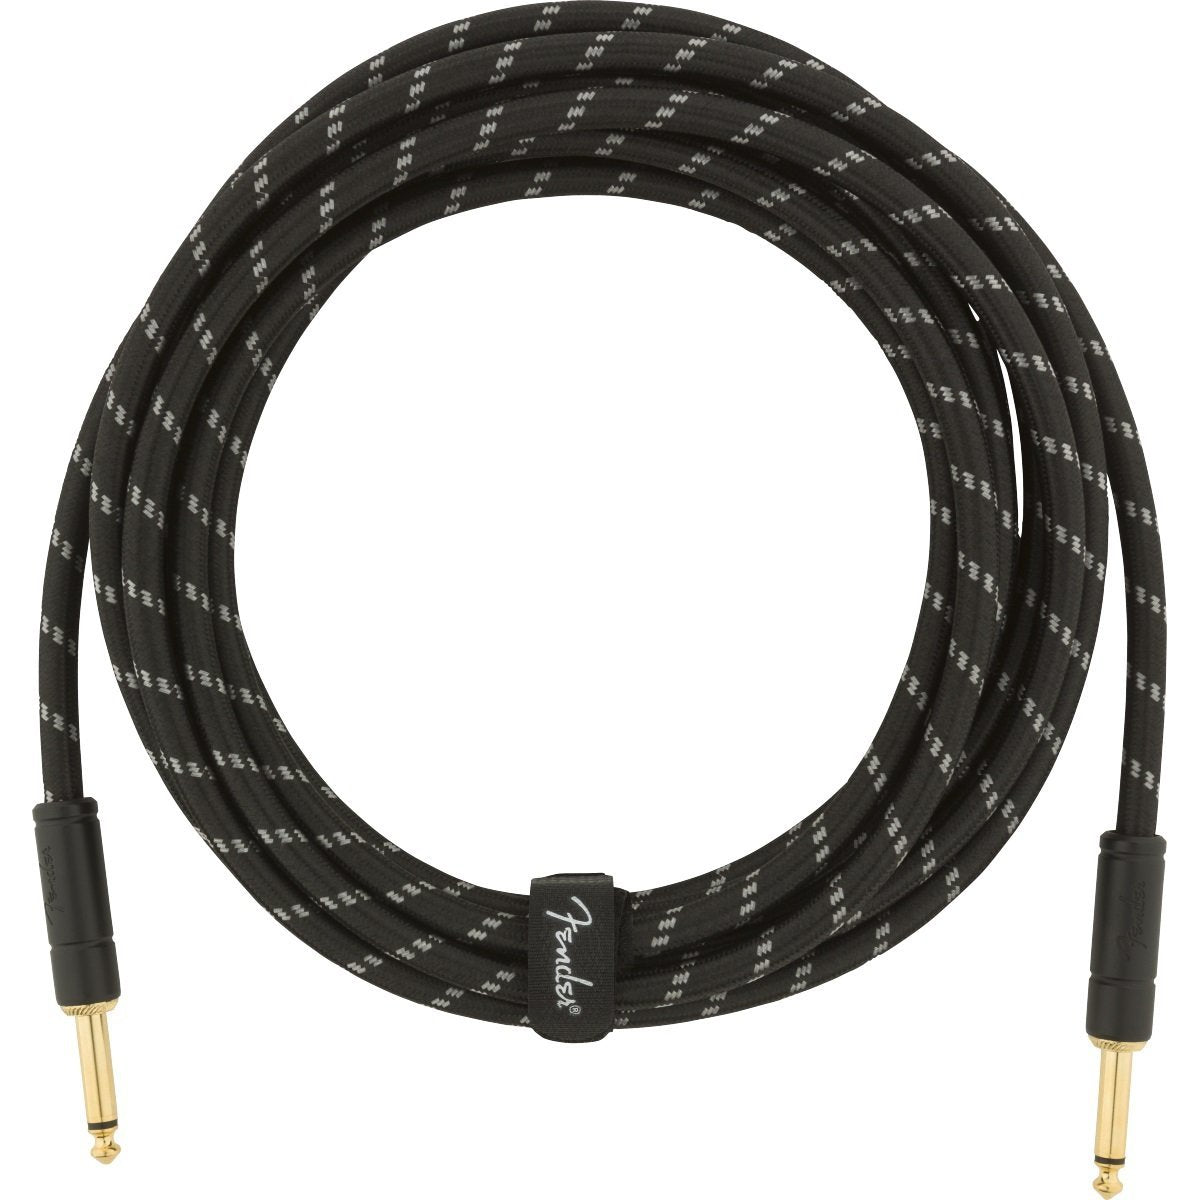 Fender Deluxe Series Instrument Cable 1/4" Male-1/4" Male 15ft-Black Tweed-Music World Academy